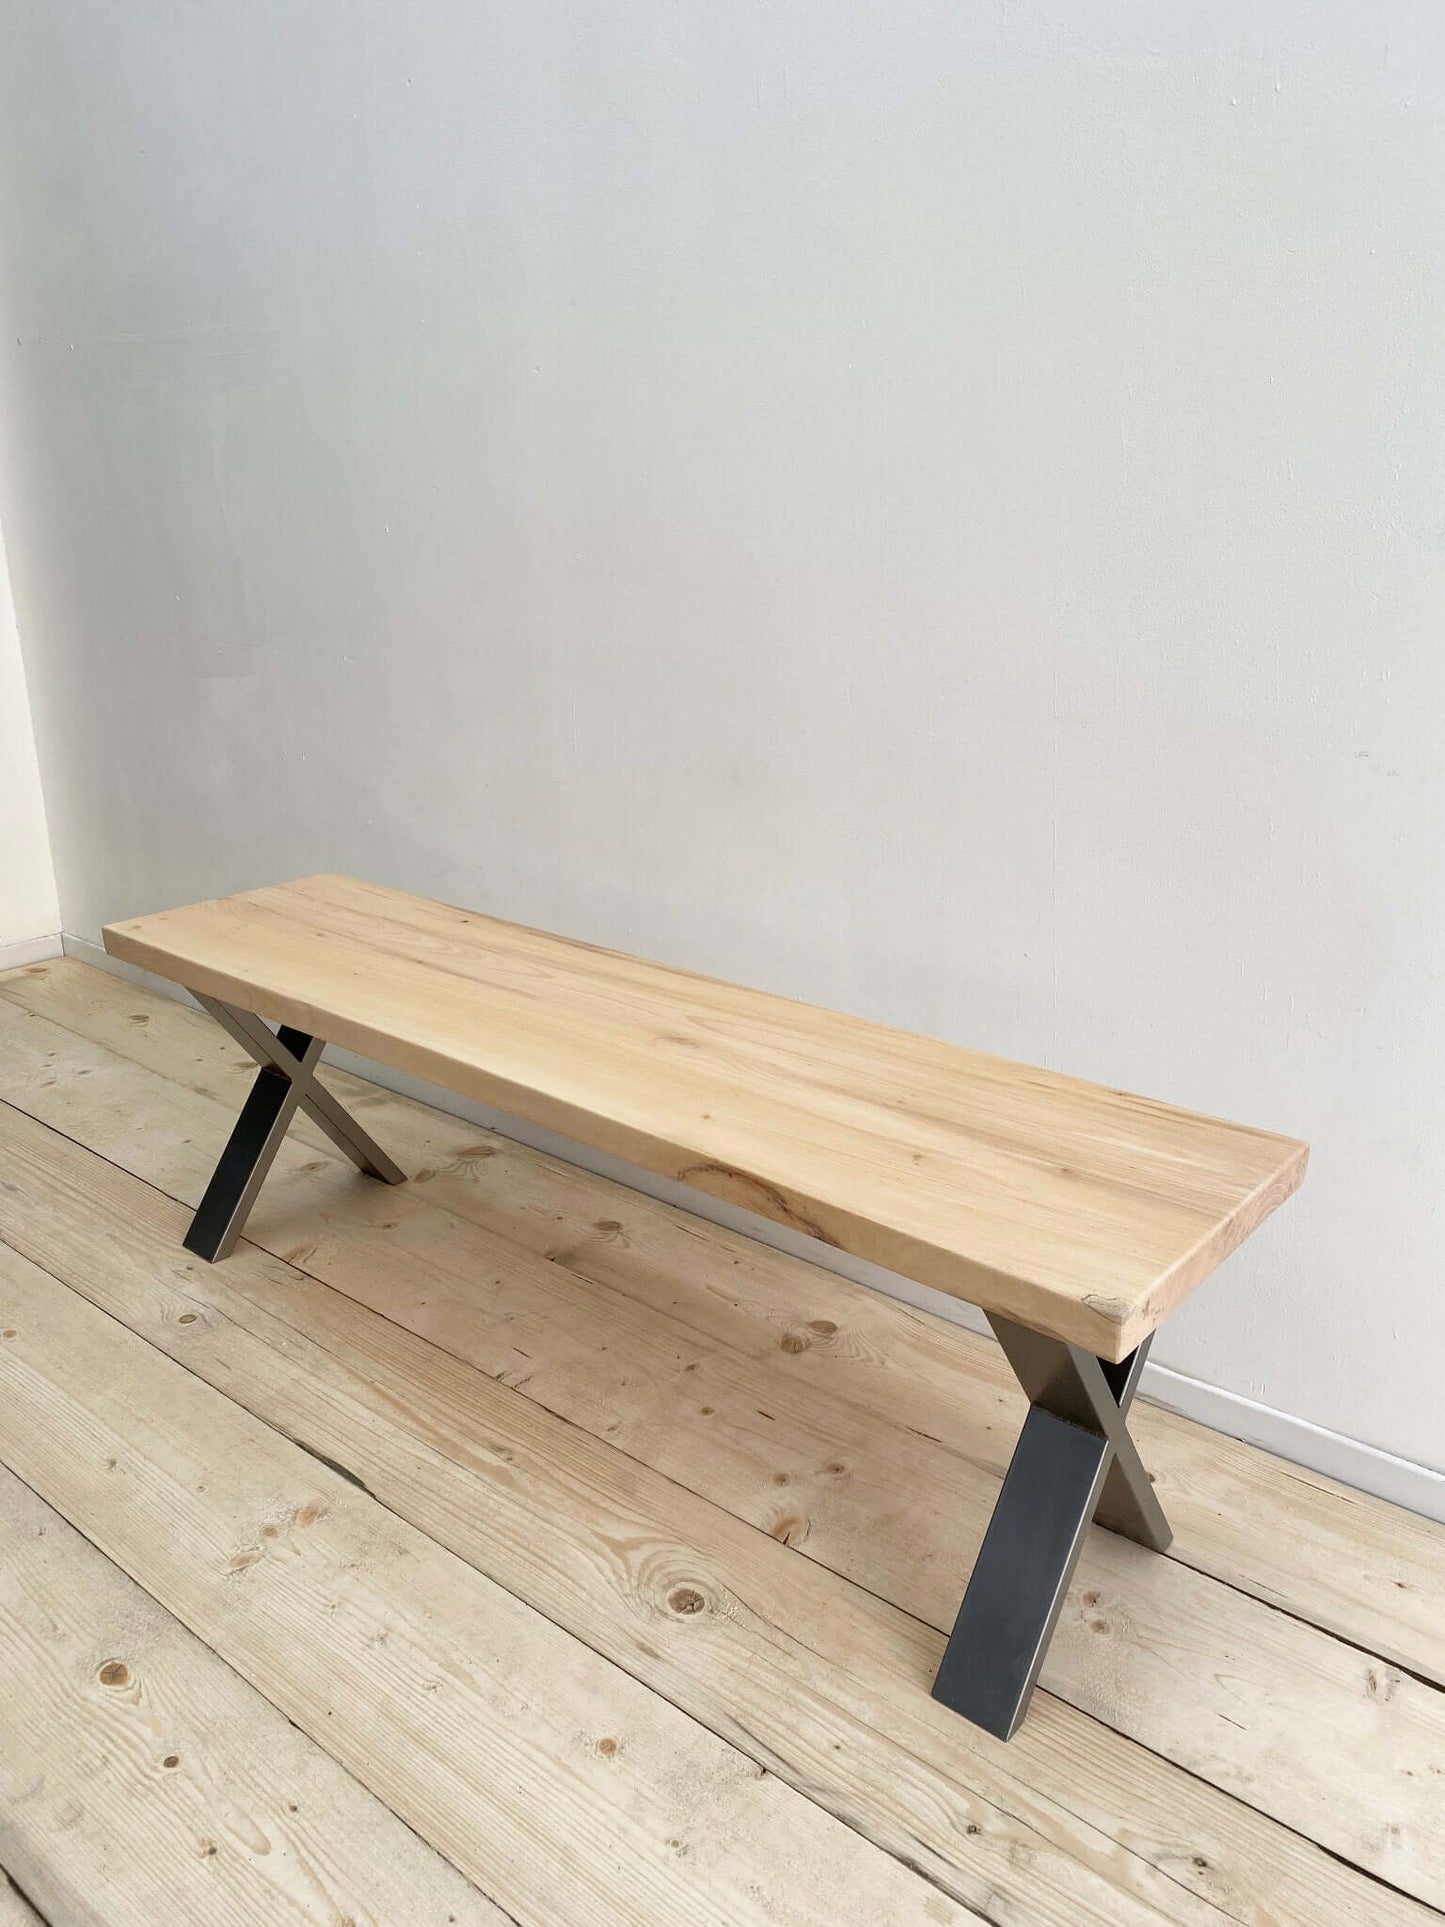 Hardwood bench seat with industrial legs.